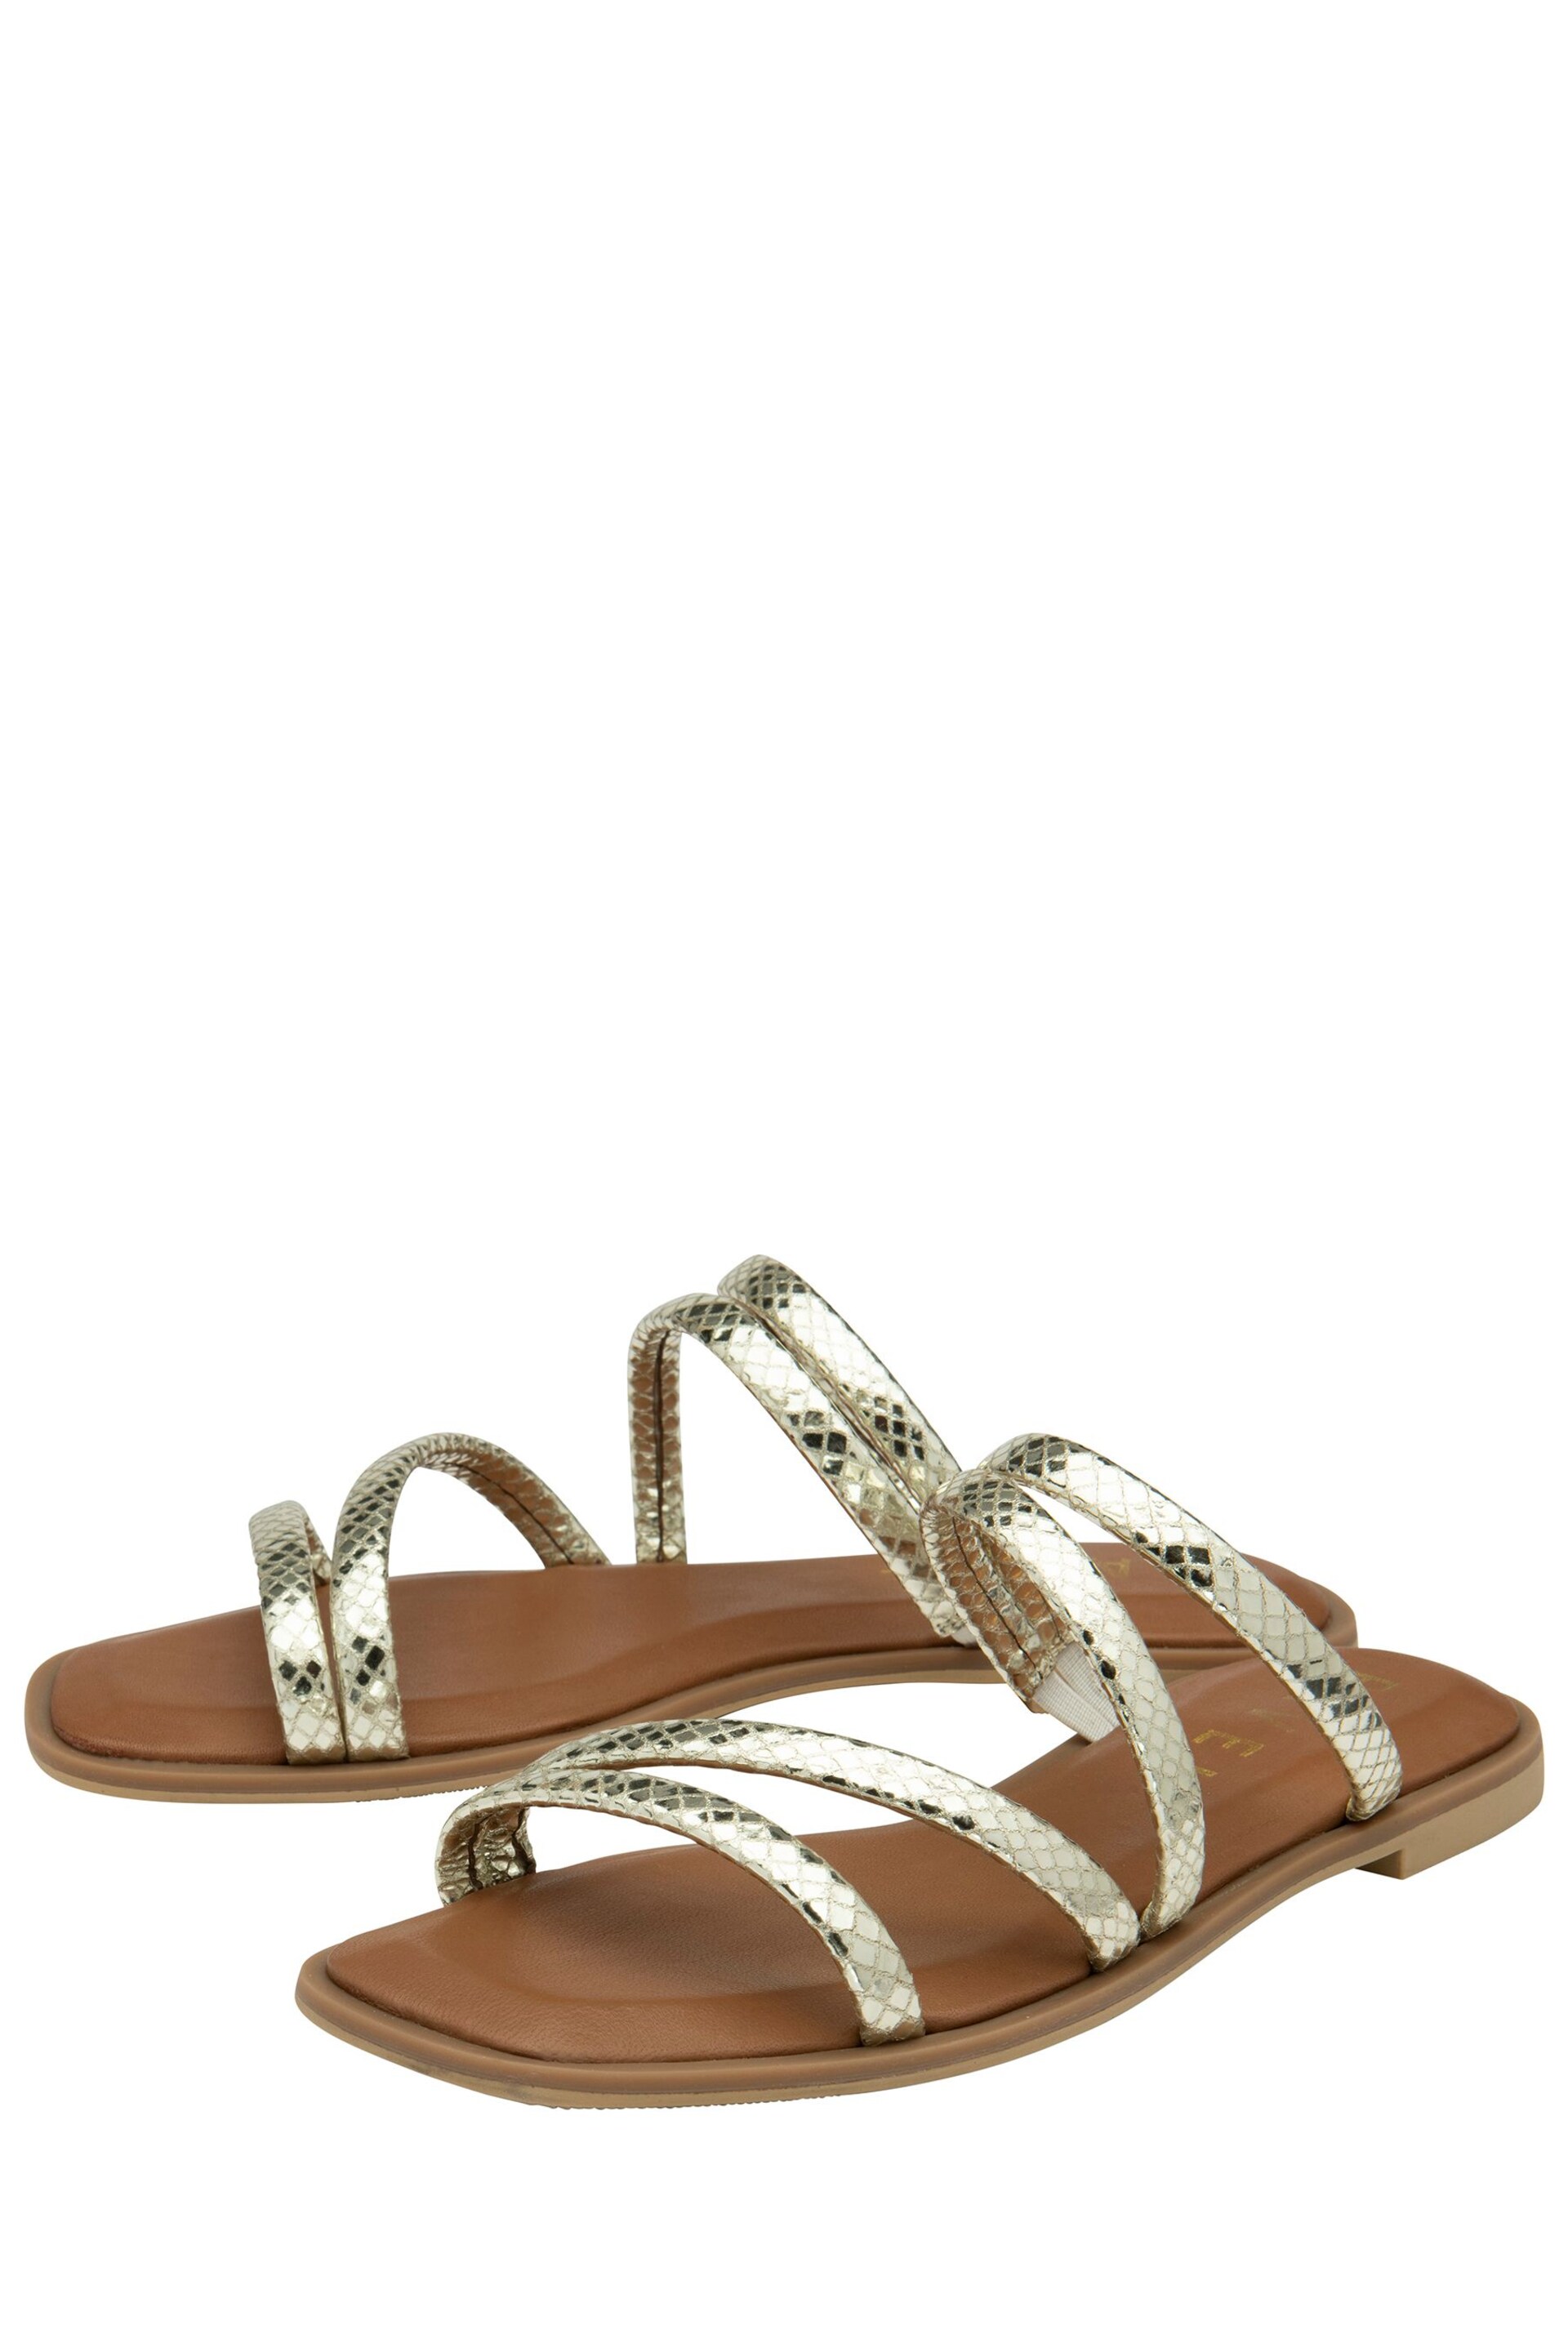 Ravel Silver/Brown Flat Strappy Mule Sandals - Image 2 of 4